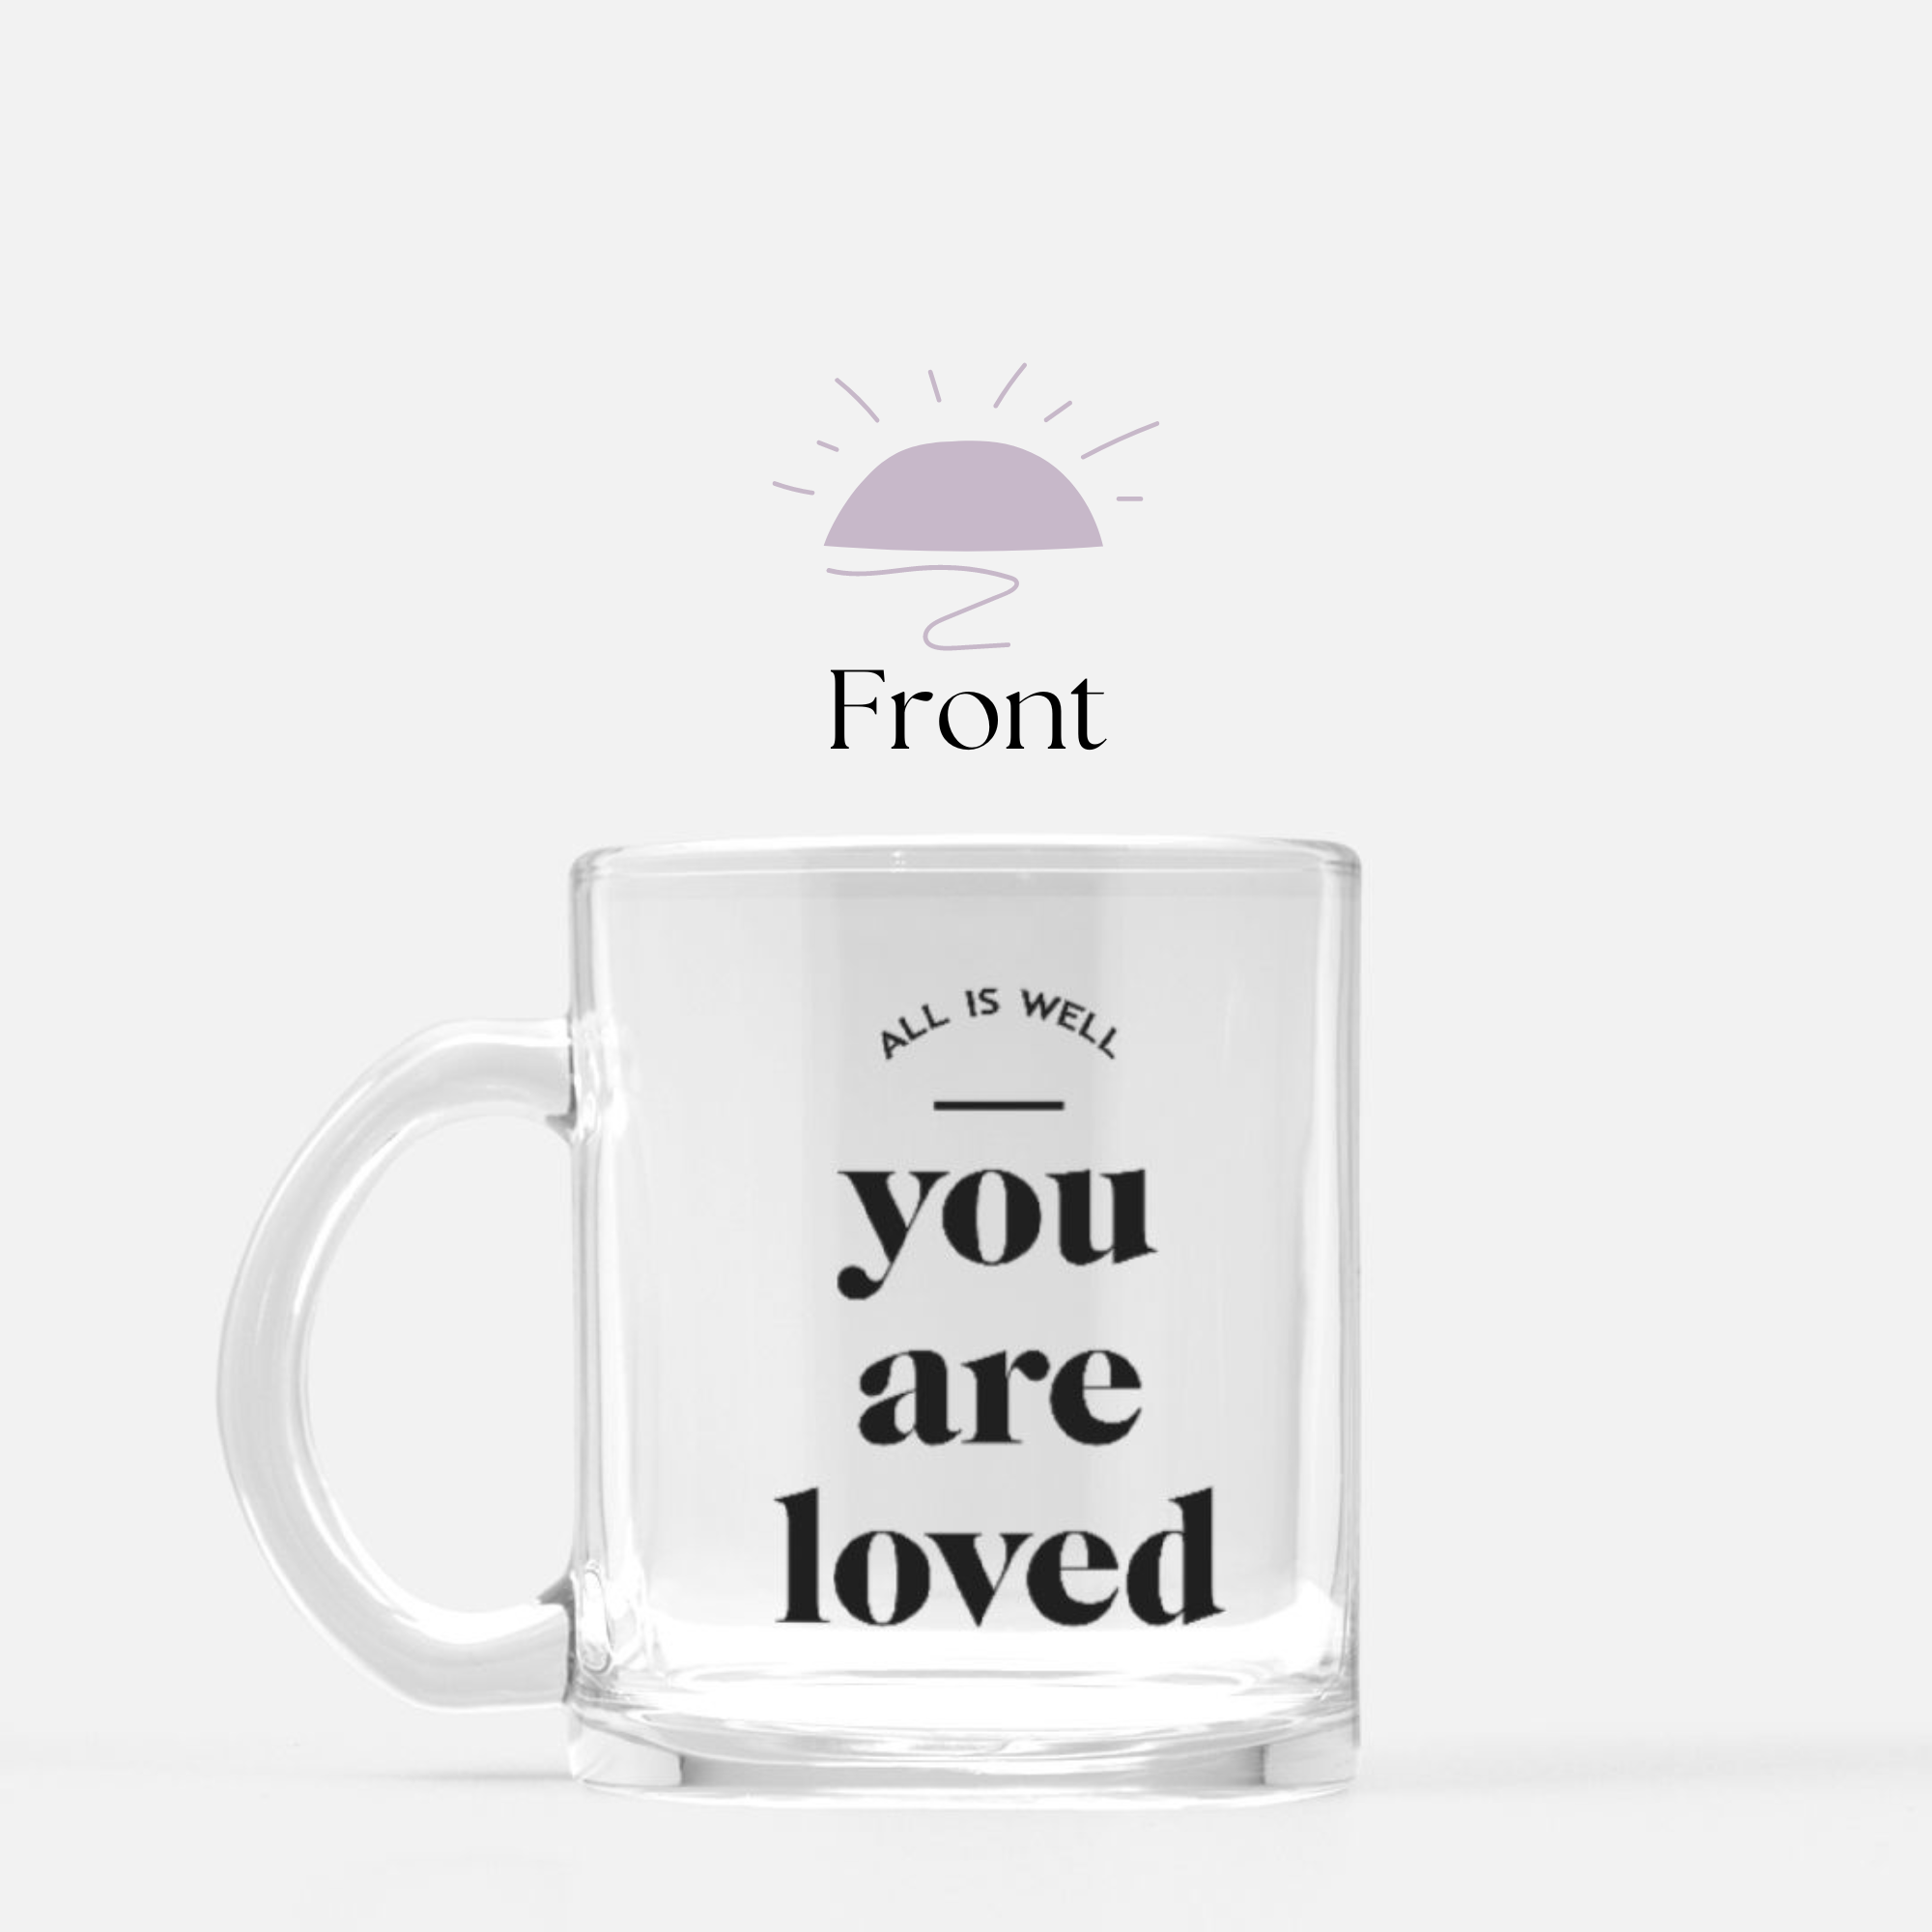 You are loved glass mug front